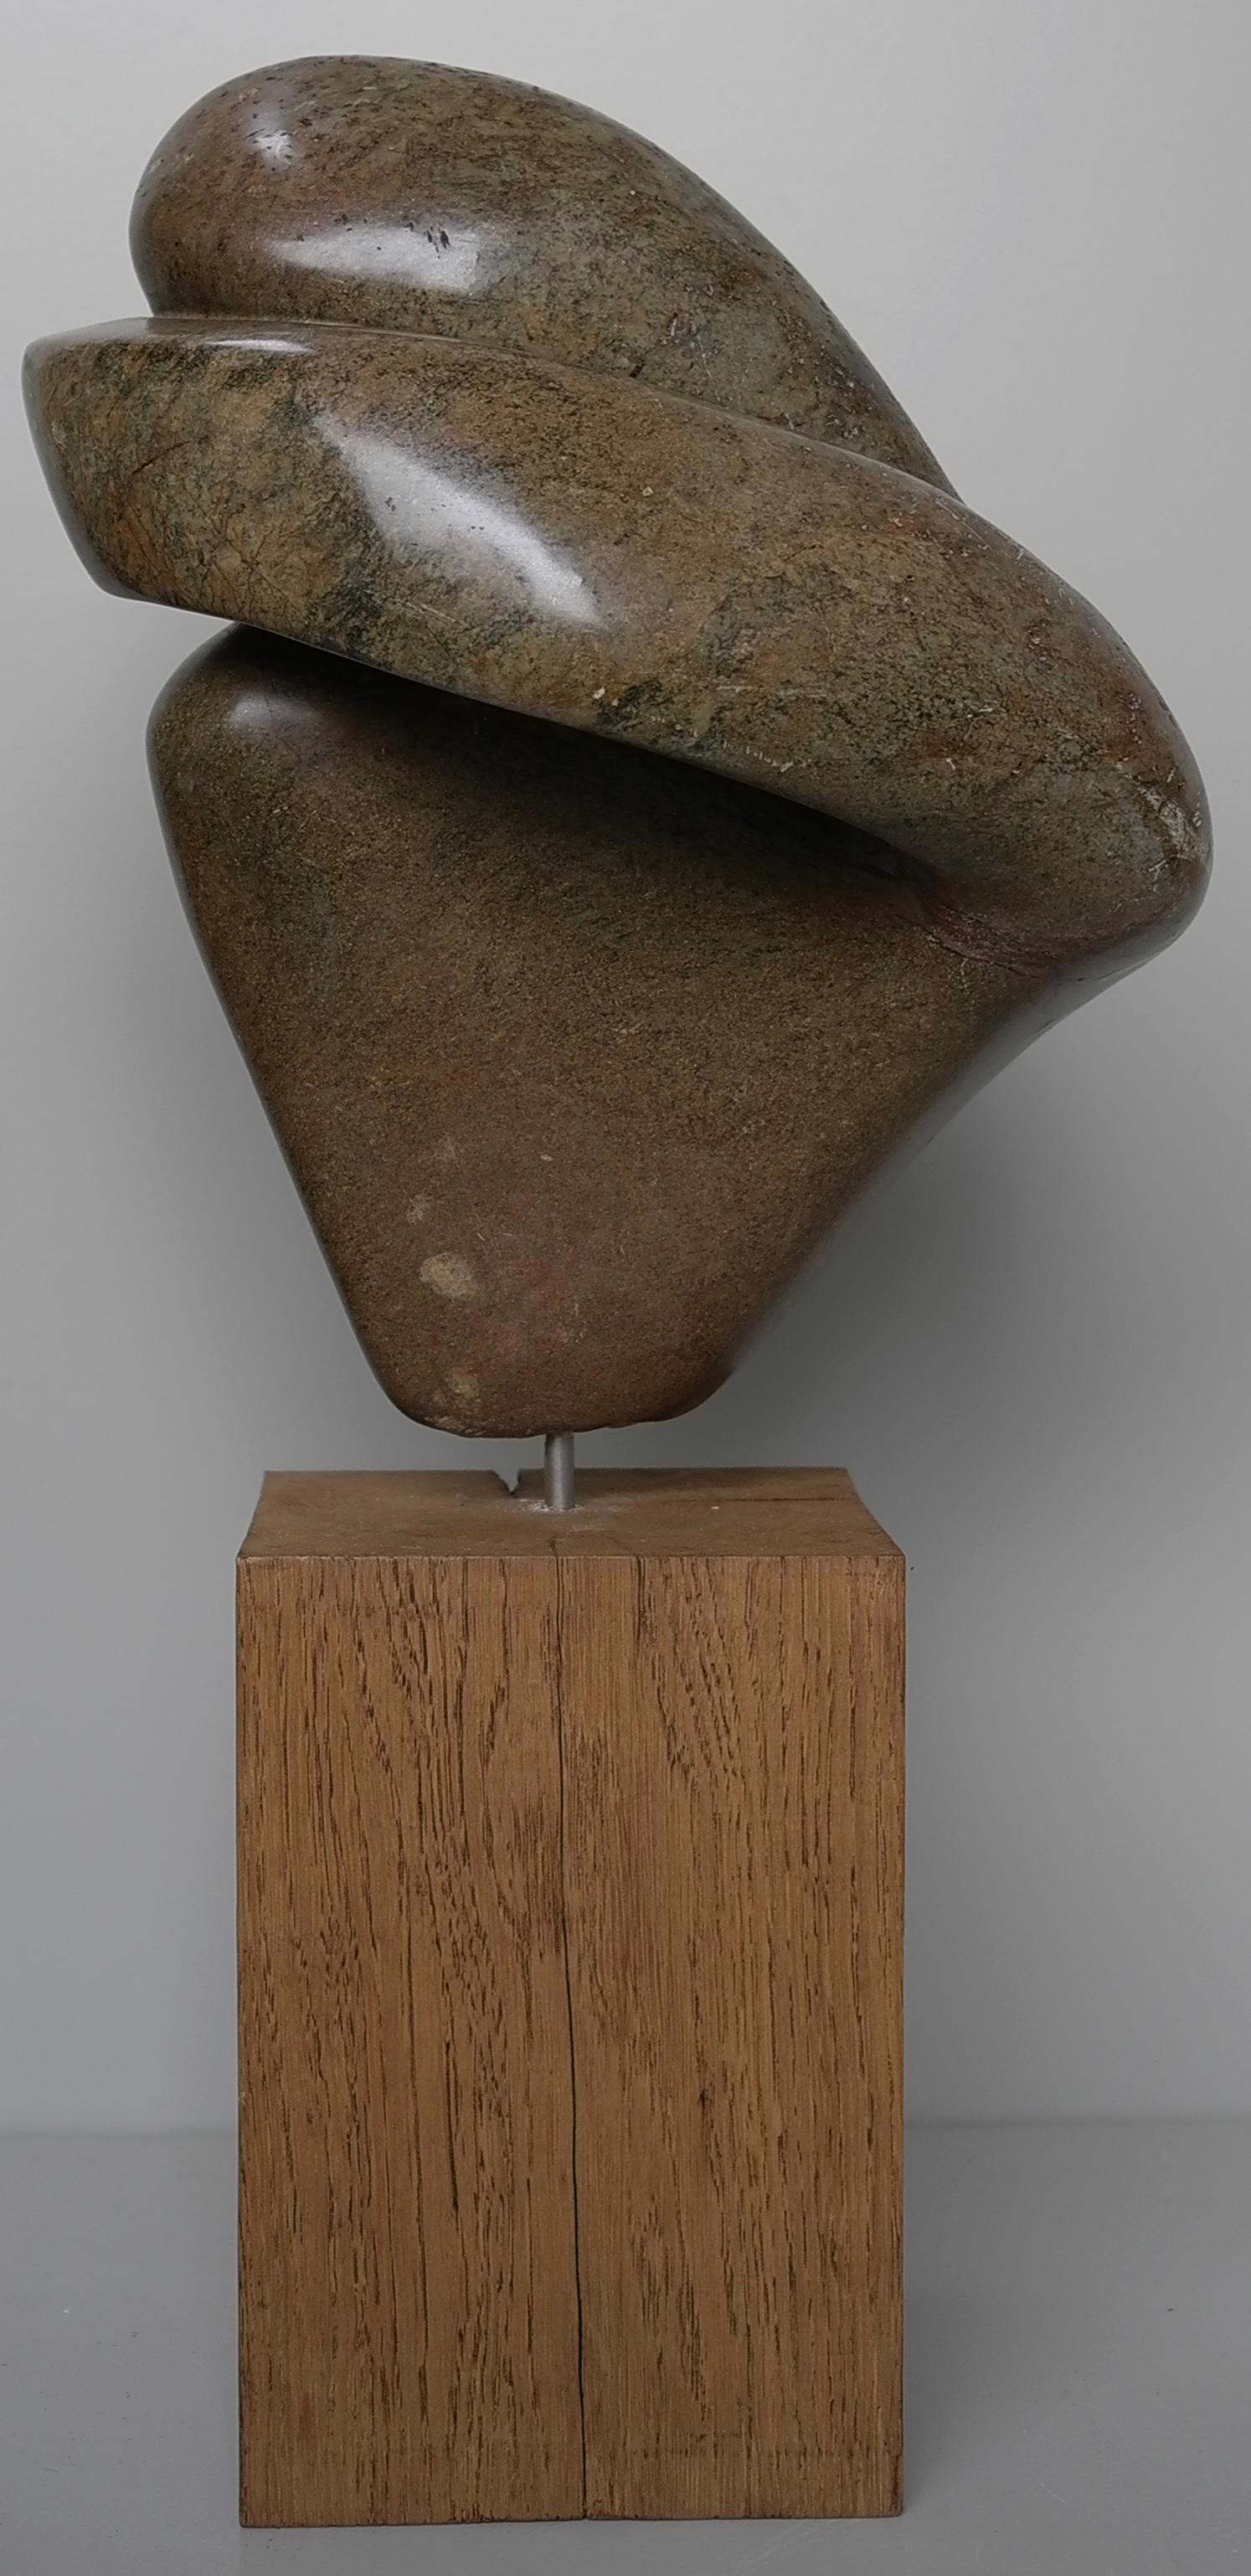 Organic Green and Brown Steatite (Soapstone) Abstract Sculpture, The Netherlands circa 1975

The sizes are including the Oak stand.